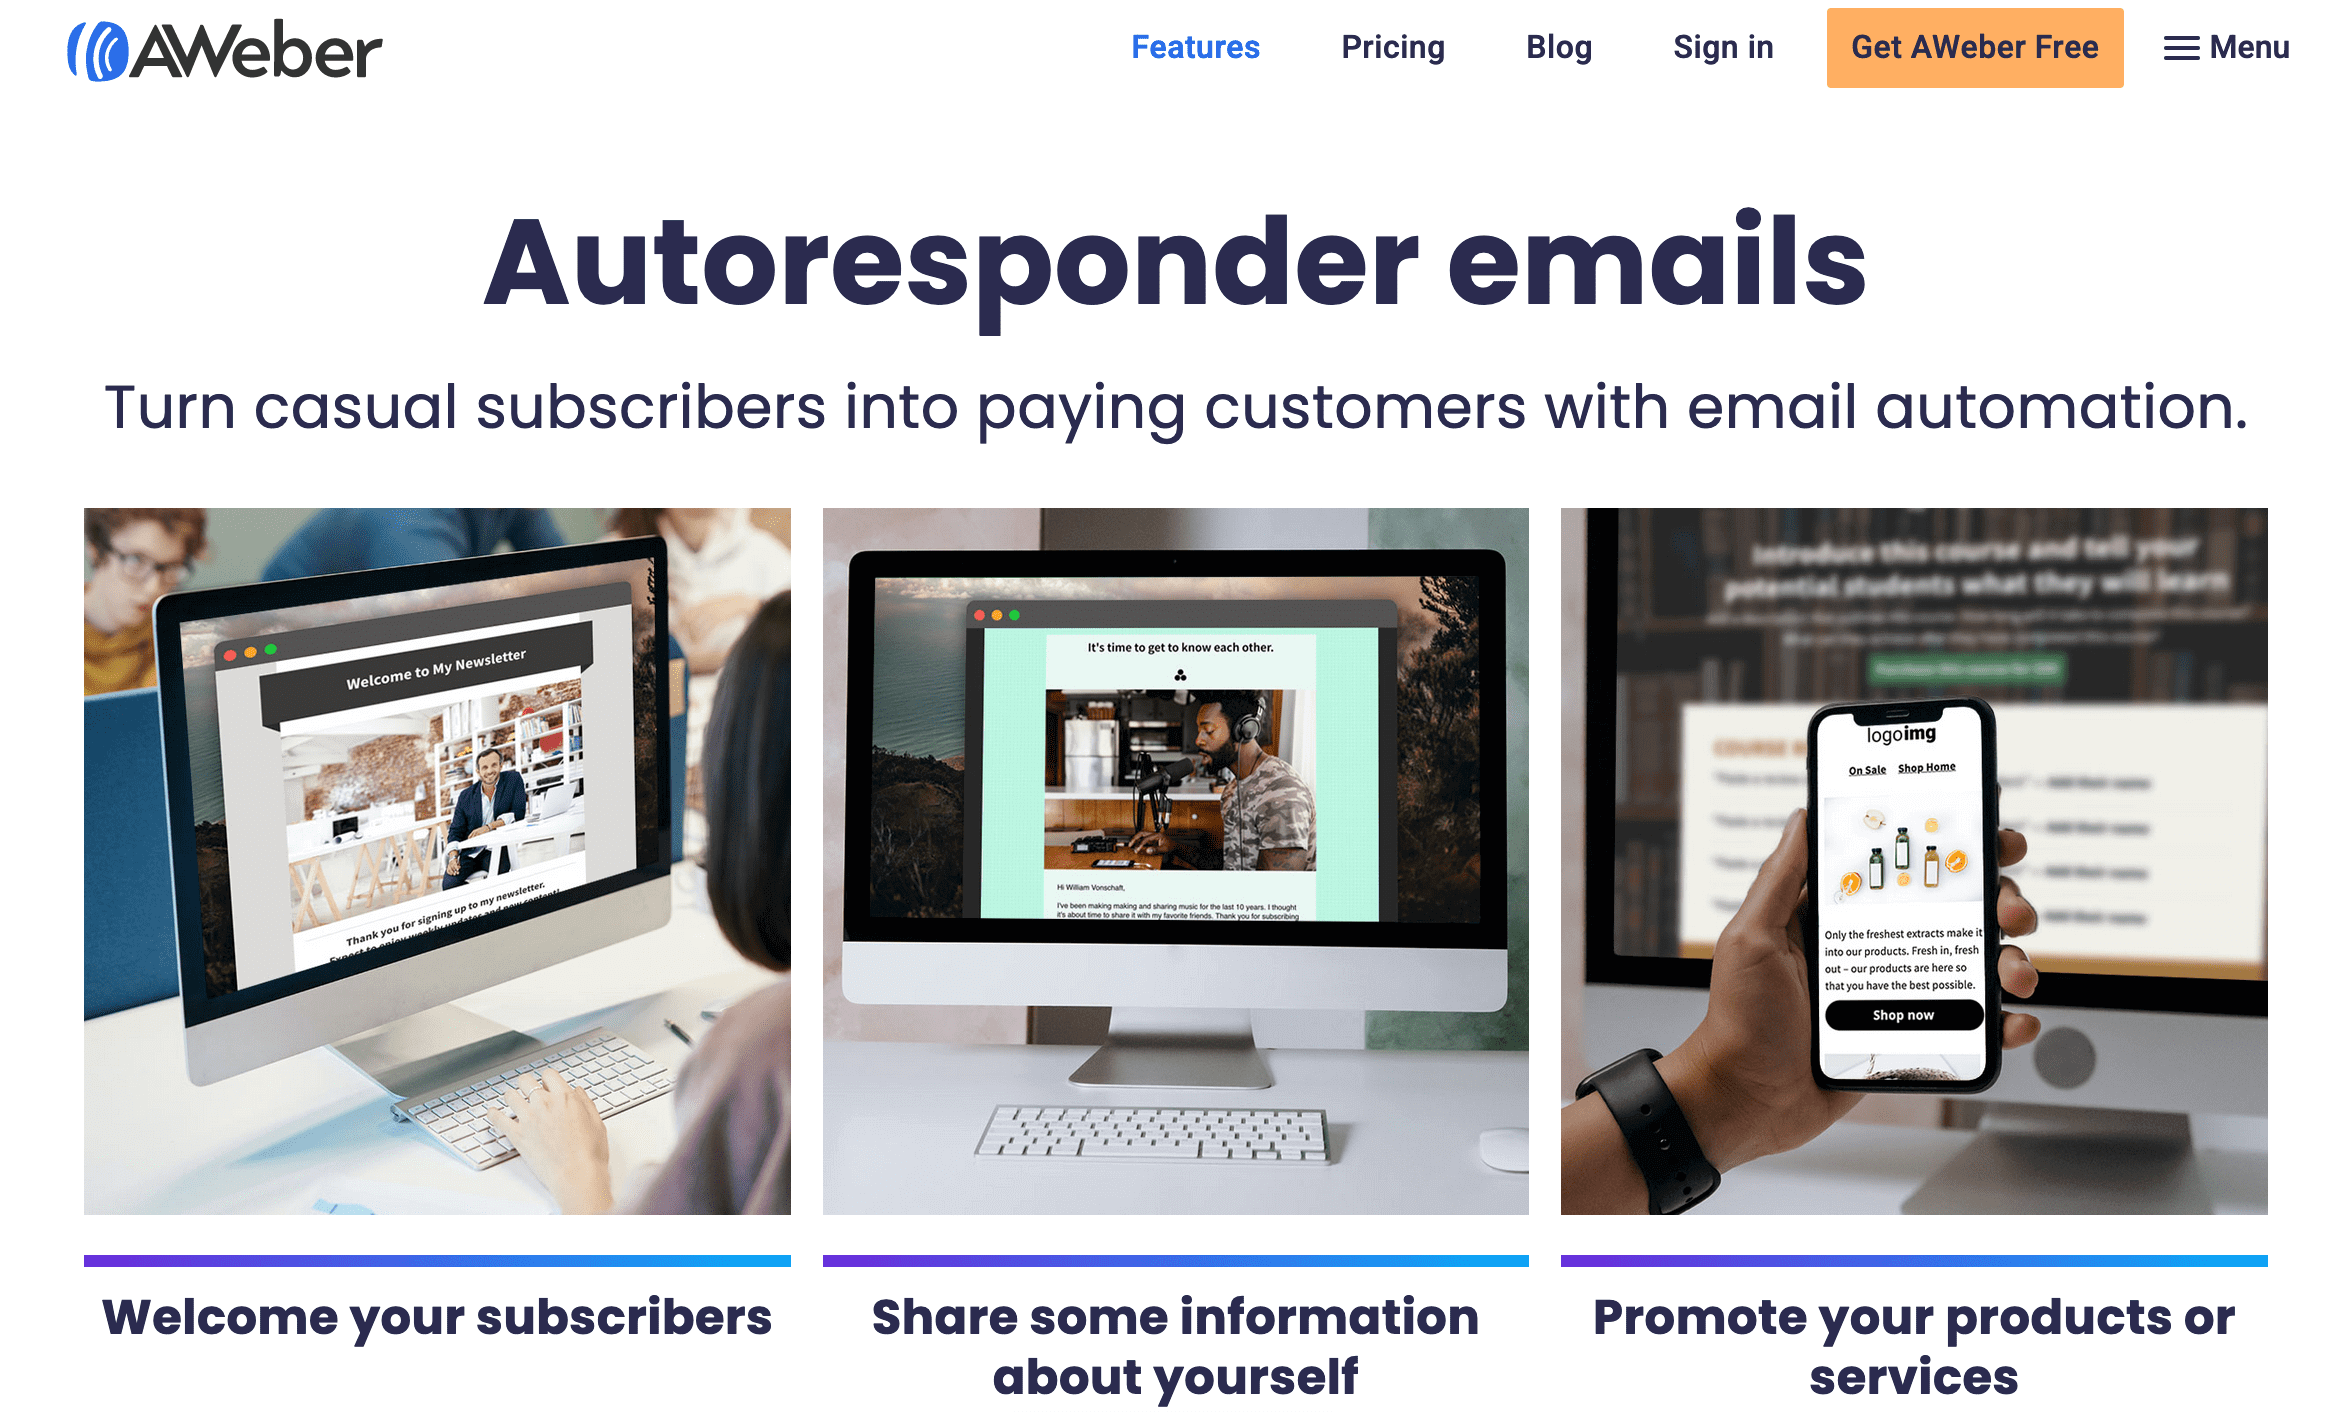 AWeber’s email autoresponder service’s landing page advertising welcoming subscribers, sharing information, and promoting products